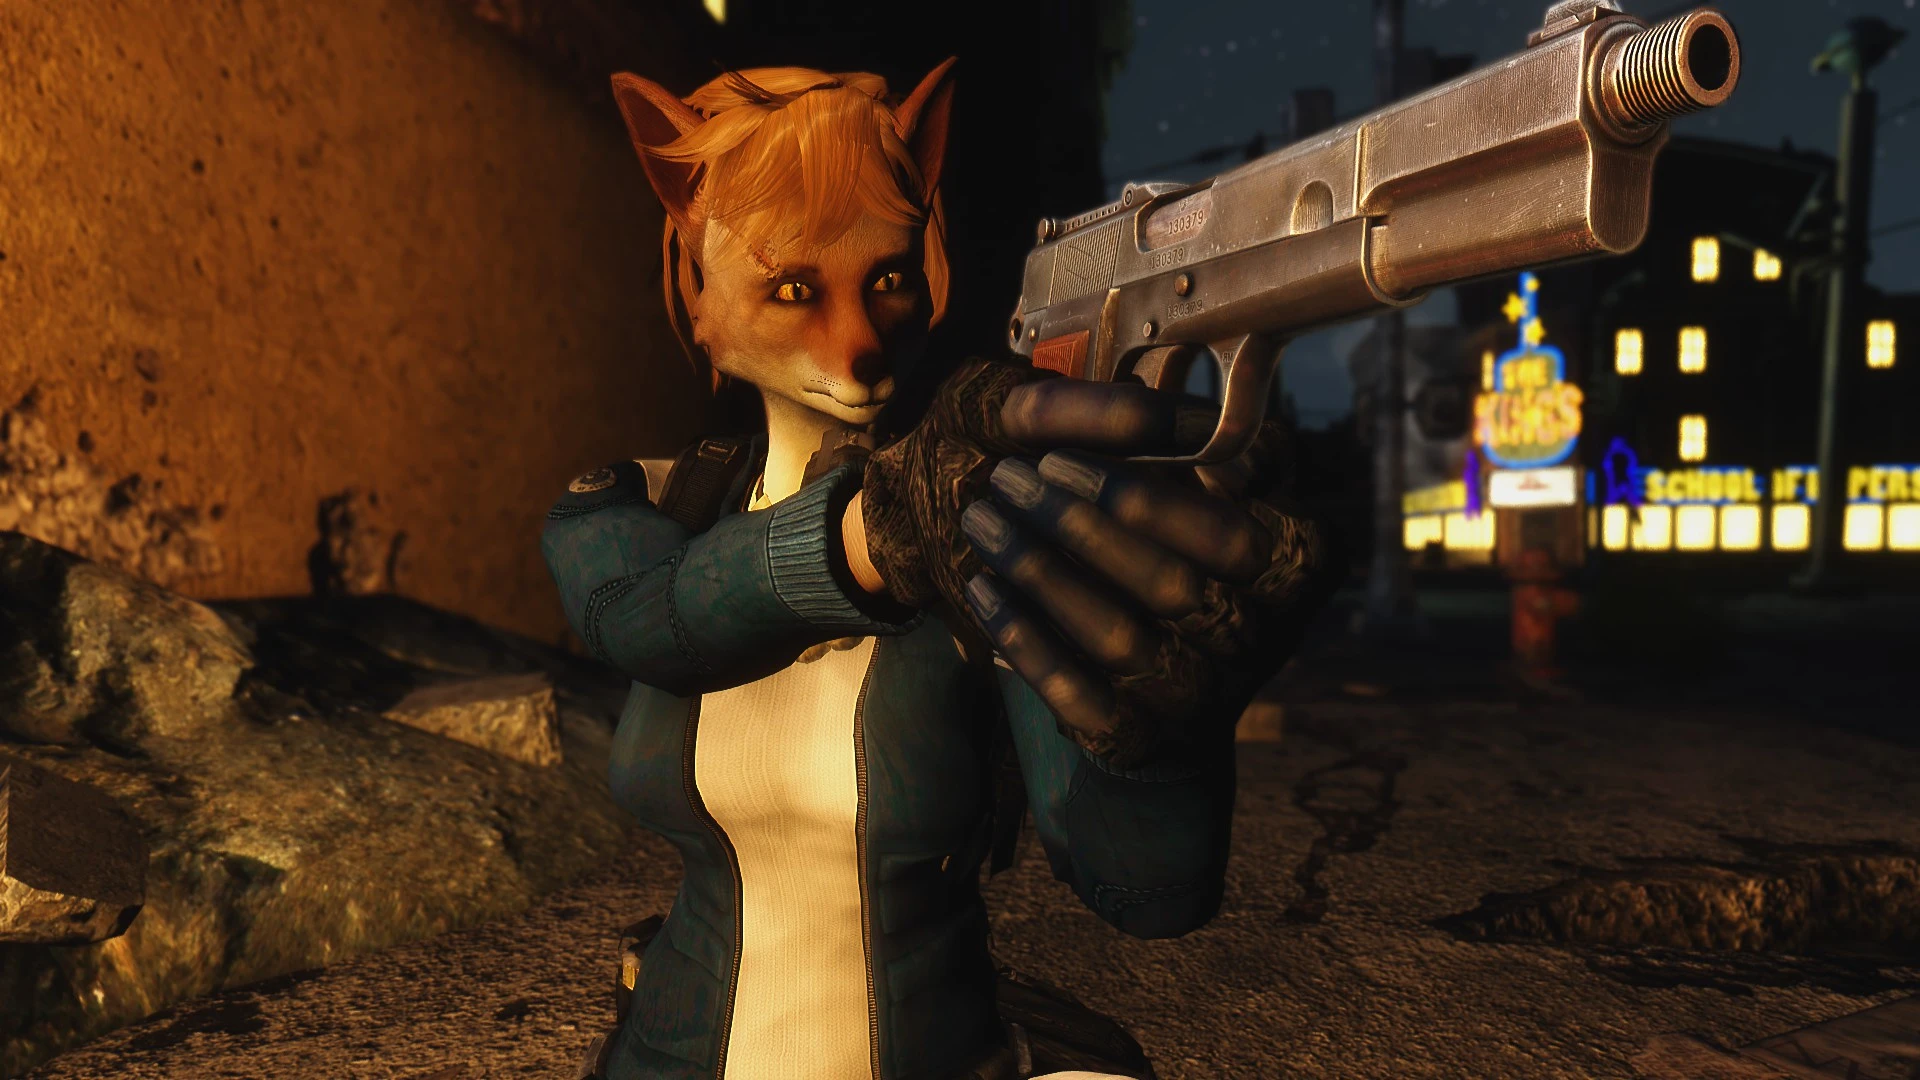 Gallery of Fallout 4 Furry Race Mod.